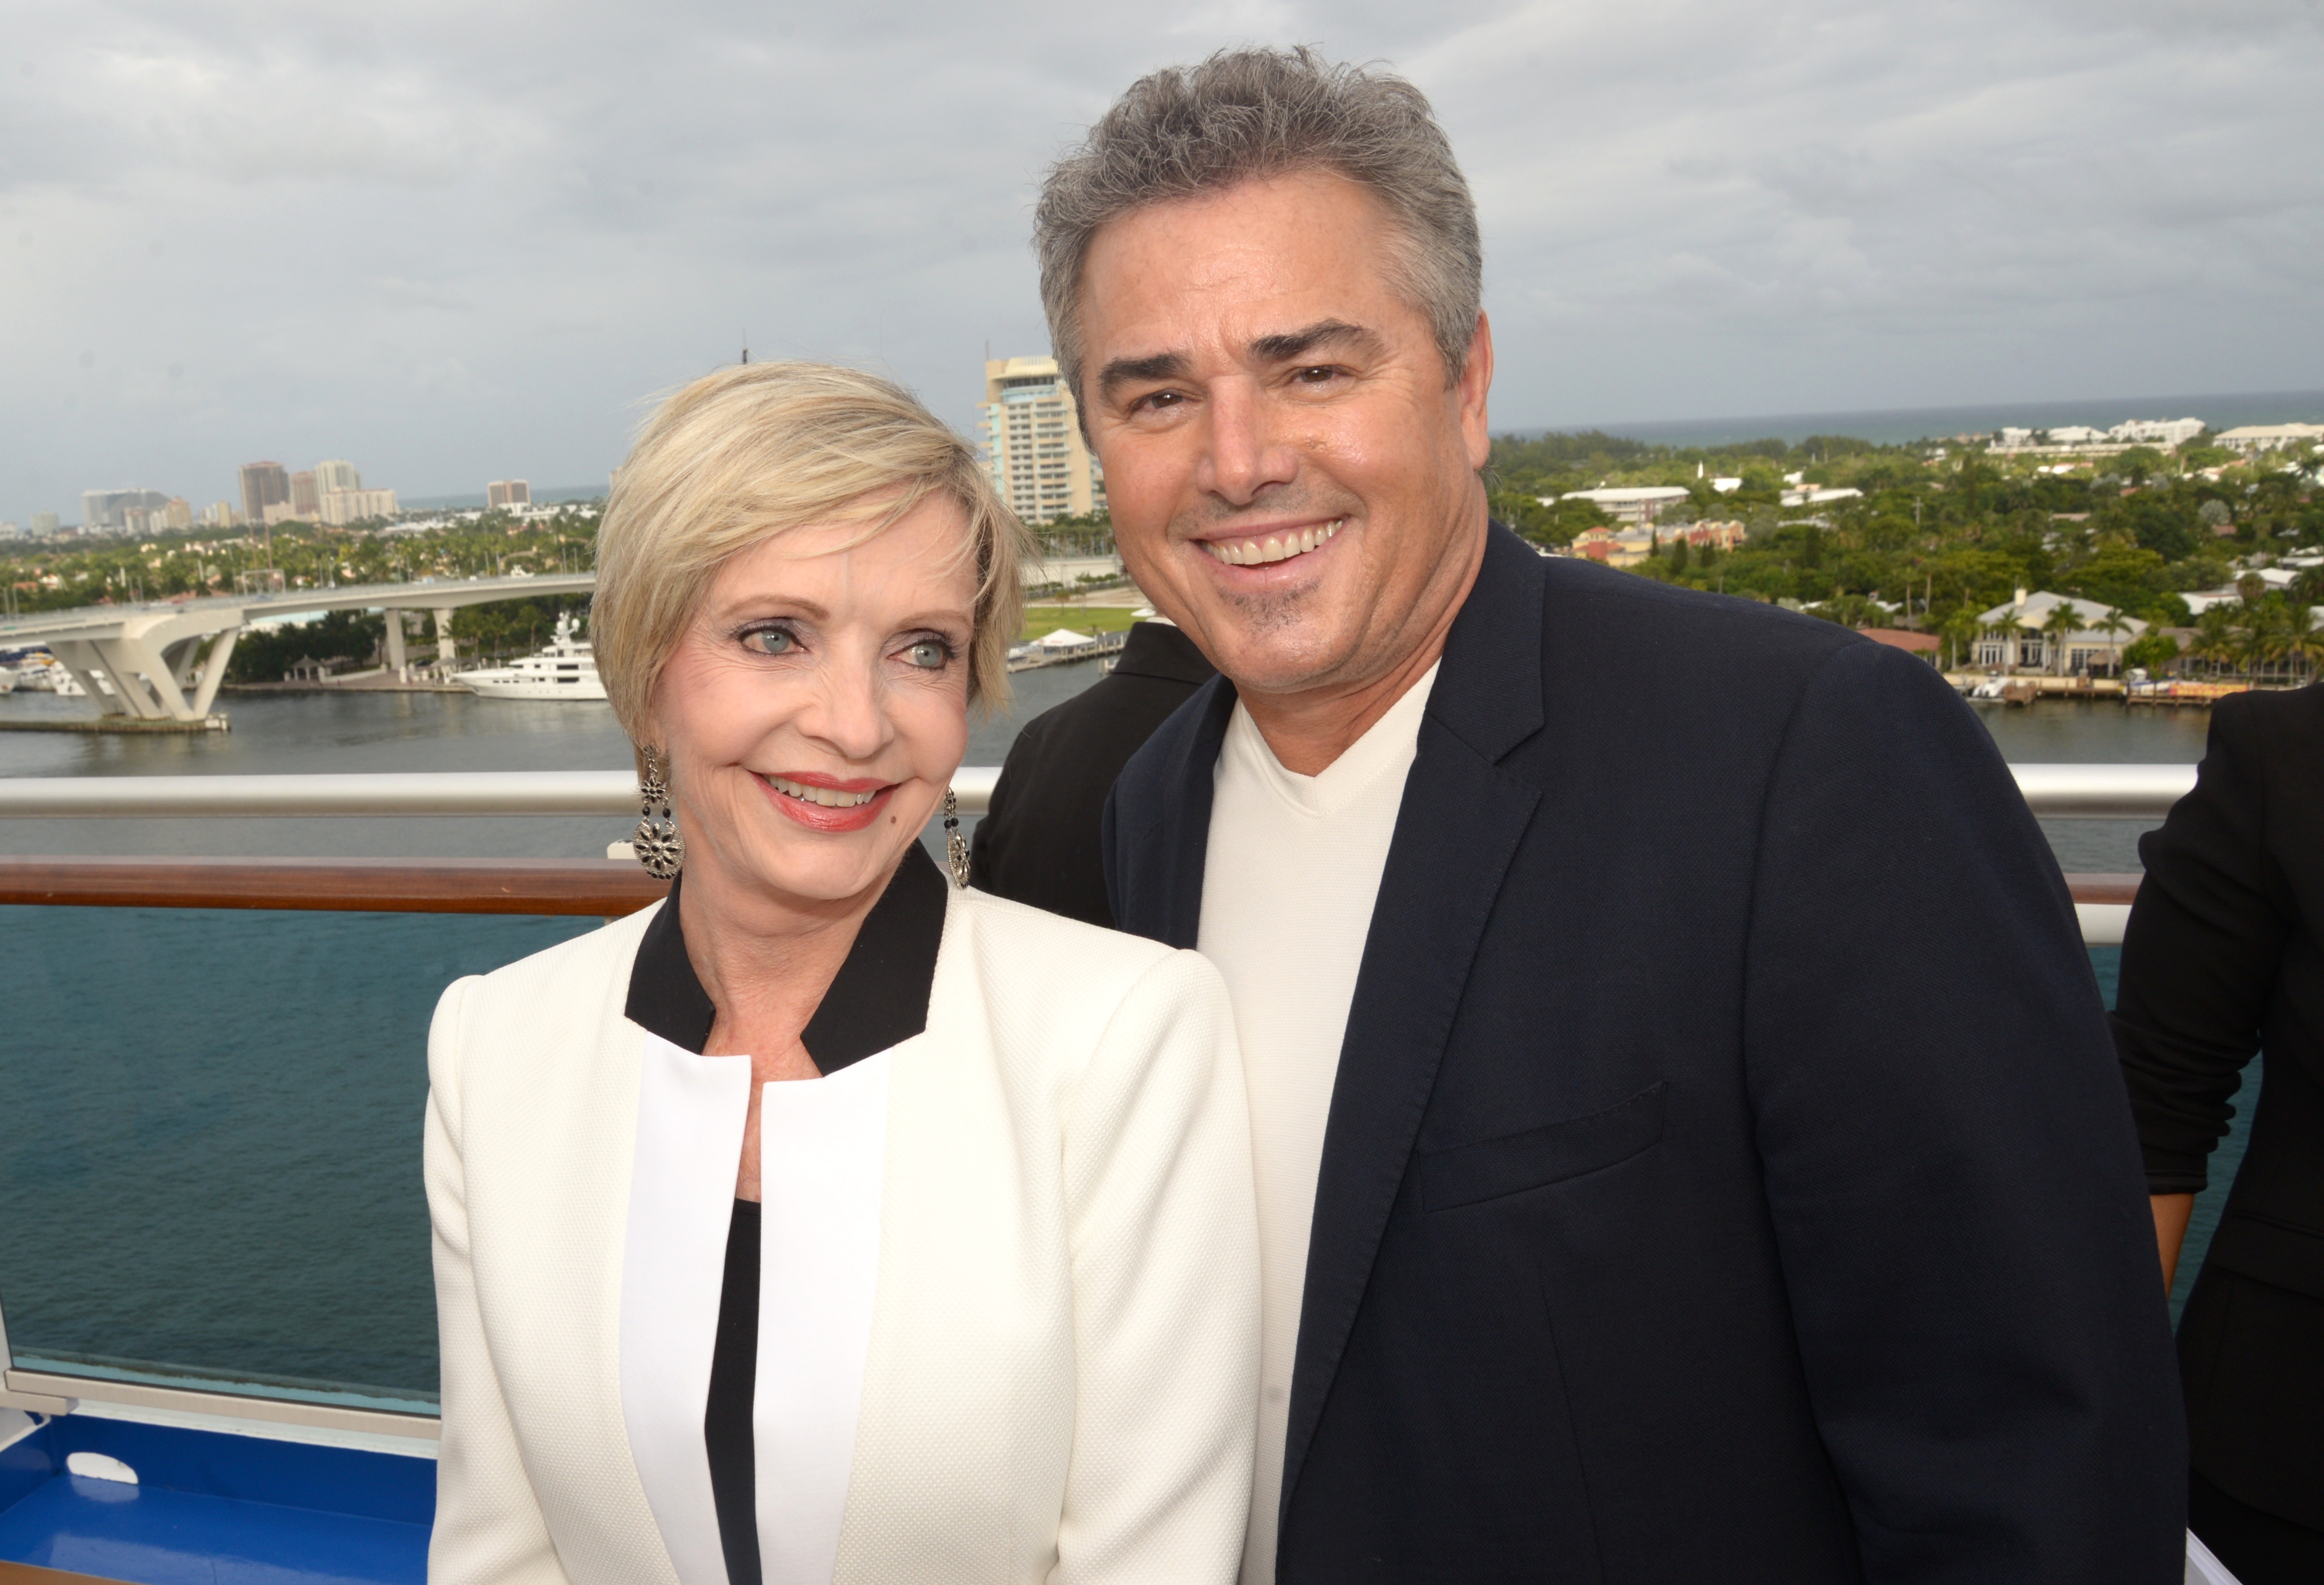 Florence Henderson and Christopher Knight at the "Love Boat" Cast Christening of Regal Princess Cruise Ship in November 2014 | Source: Getty Images